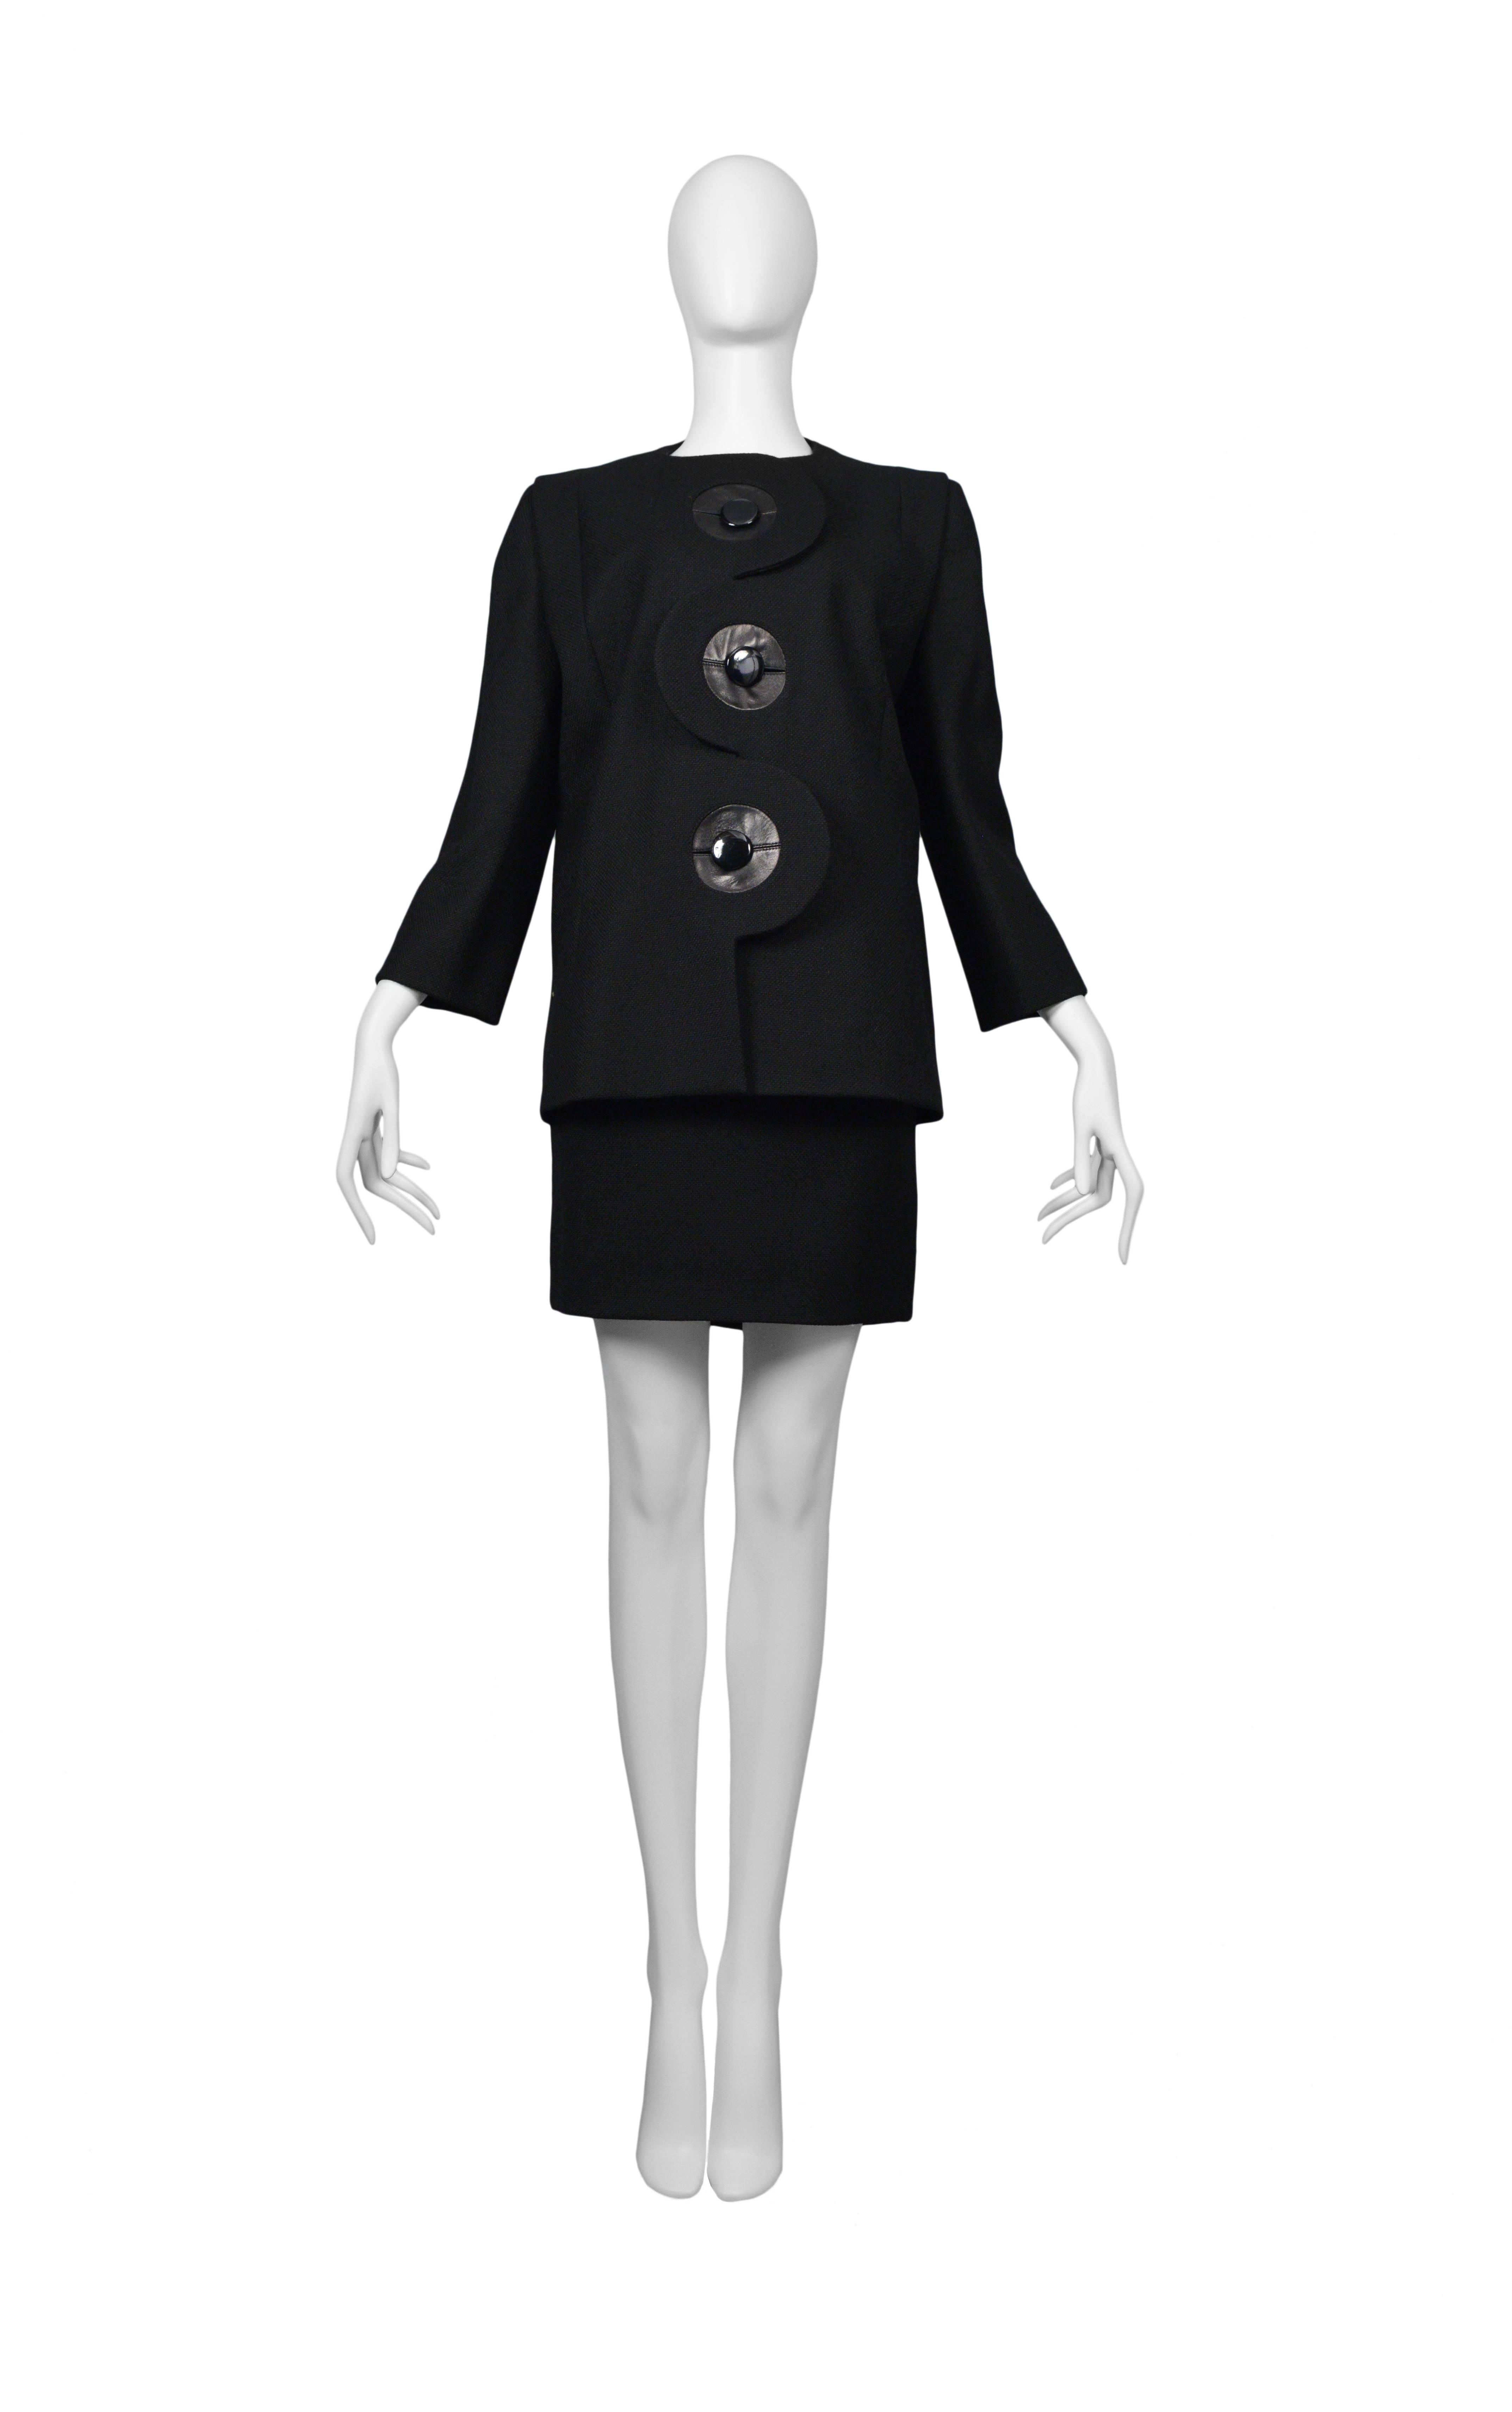 Pierre Cardin Couture black iconic suit. Leather trim at button holes. Circa, 1986-1993.
Please inquire for additional images.